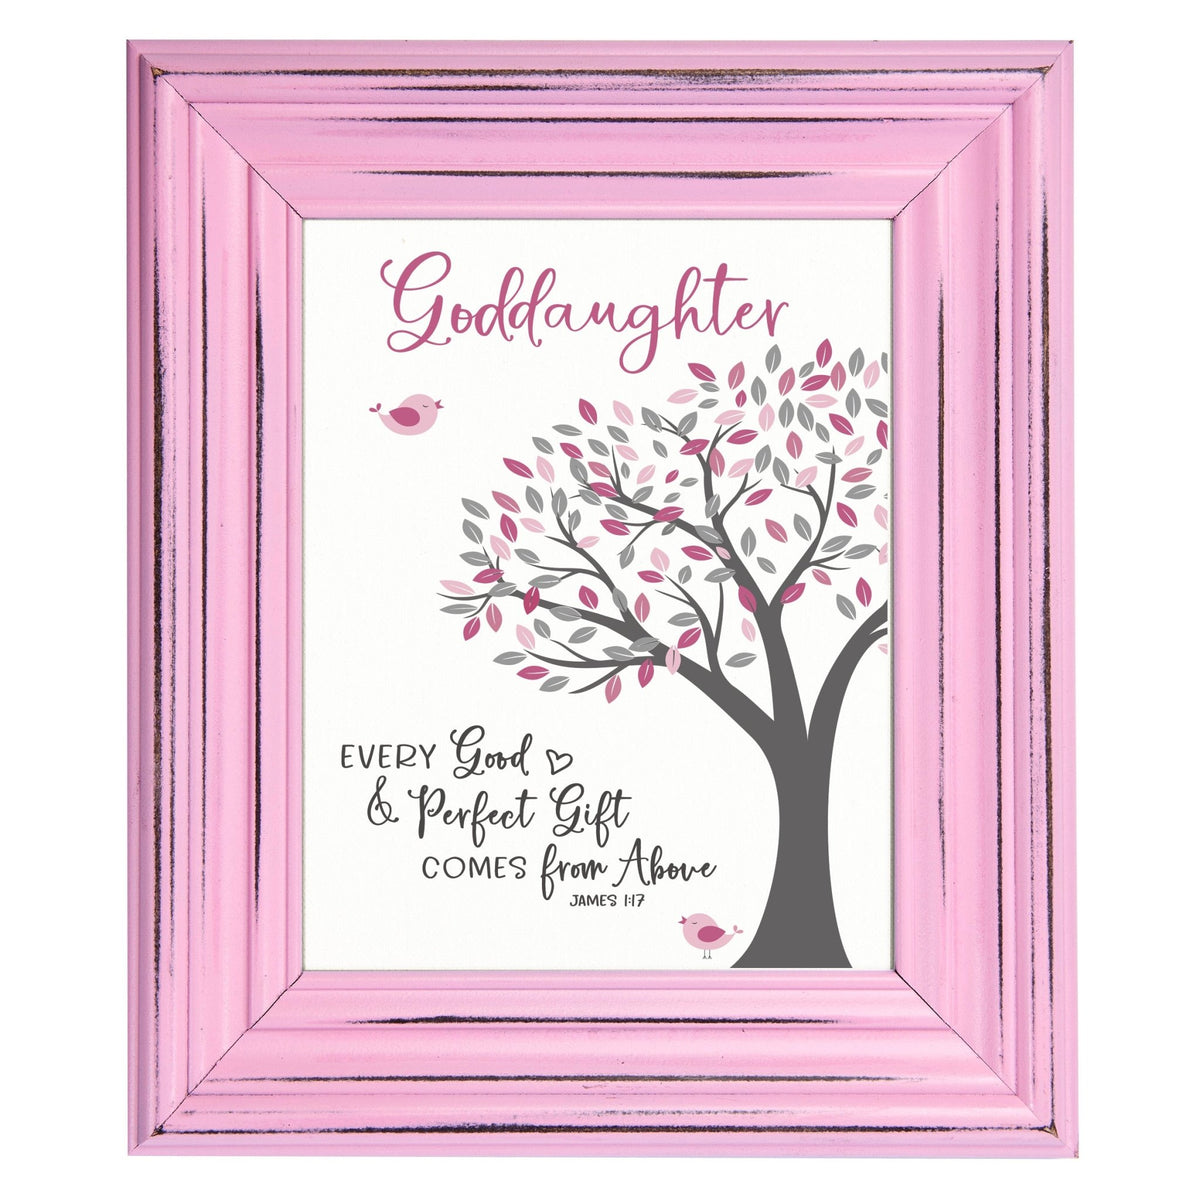 Godchild Framed Wall Signs - Every Good - LifeSong Milestones